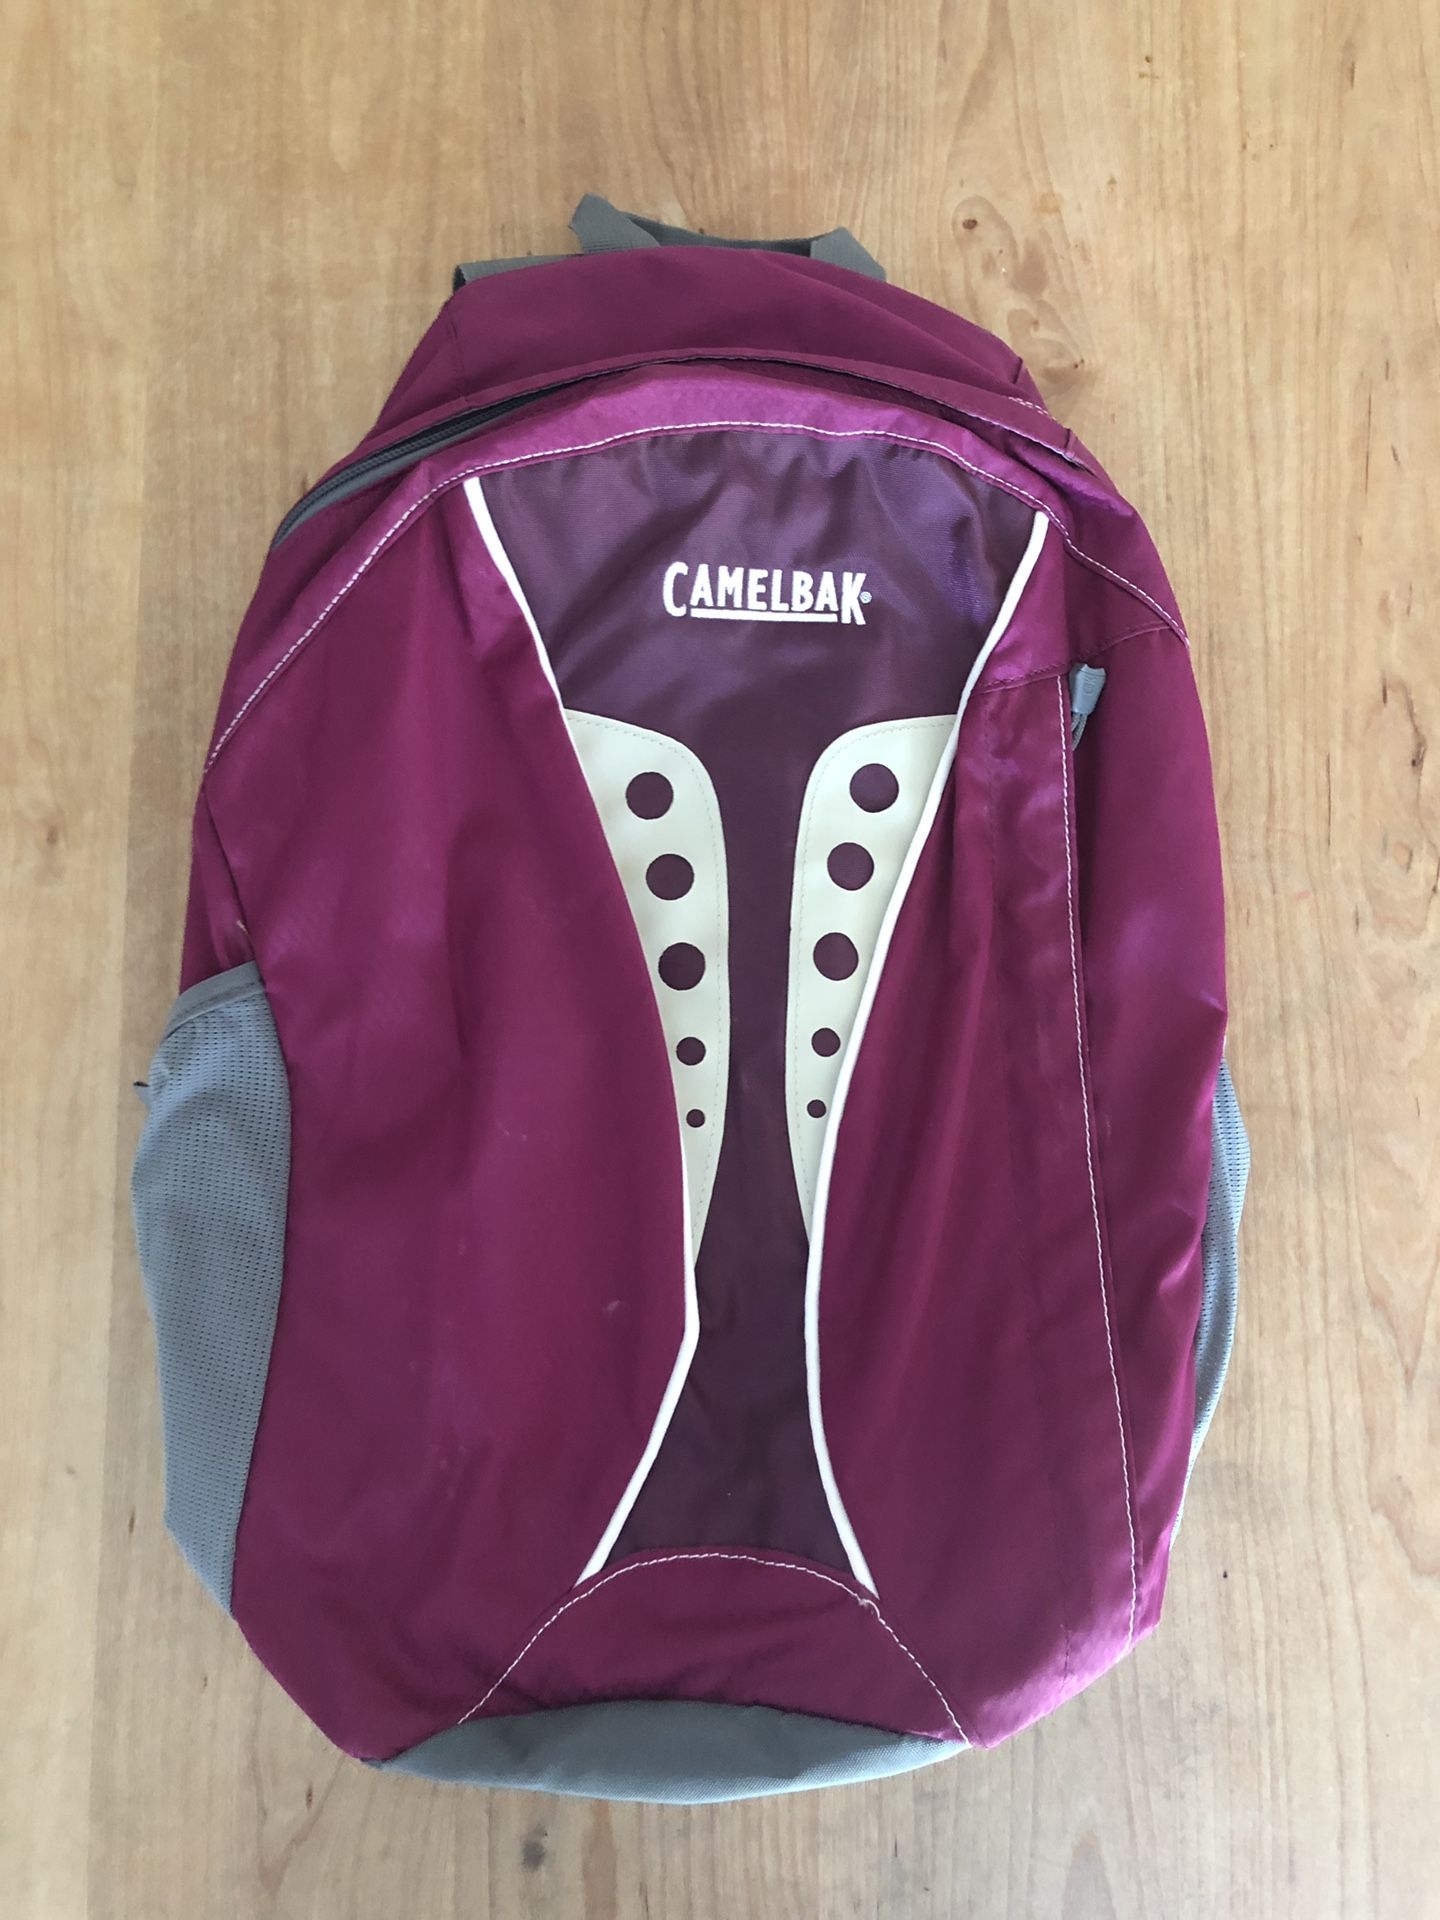 Camelbak Day Star Hydration Pack Like New CONDITION!